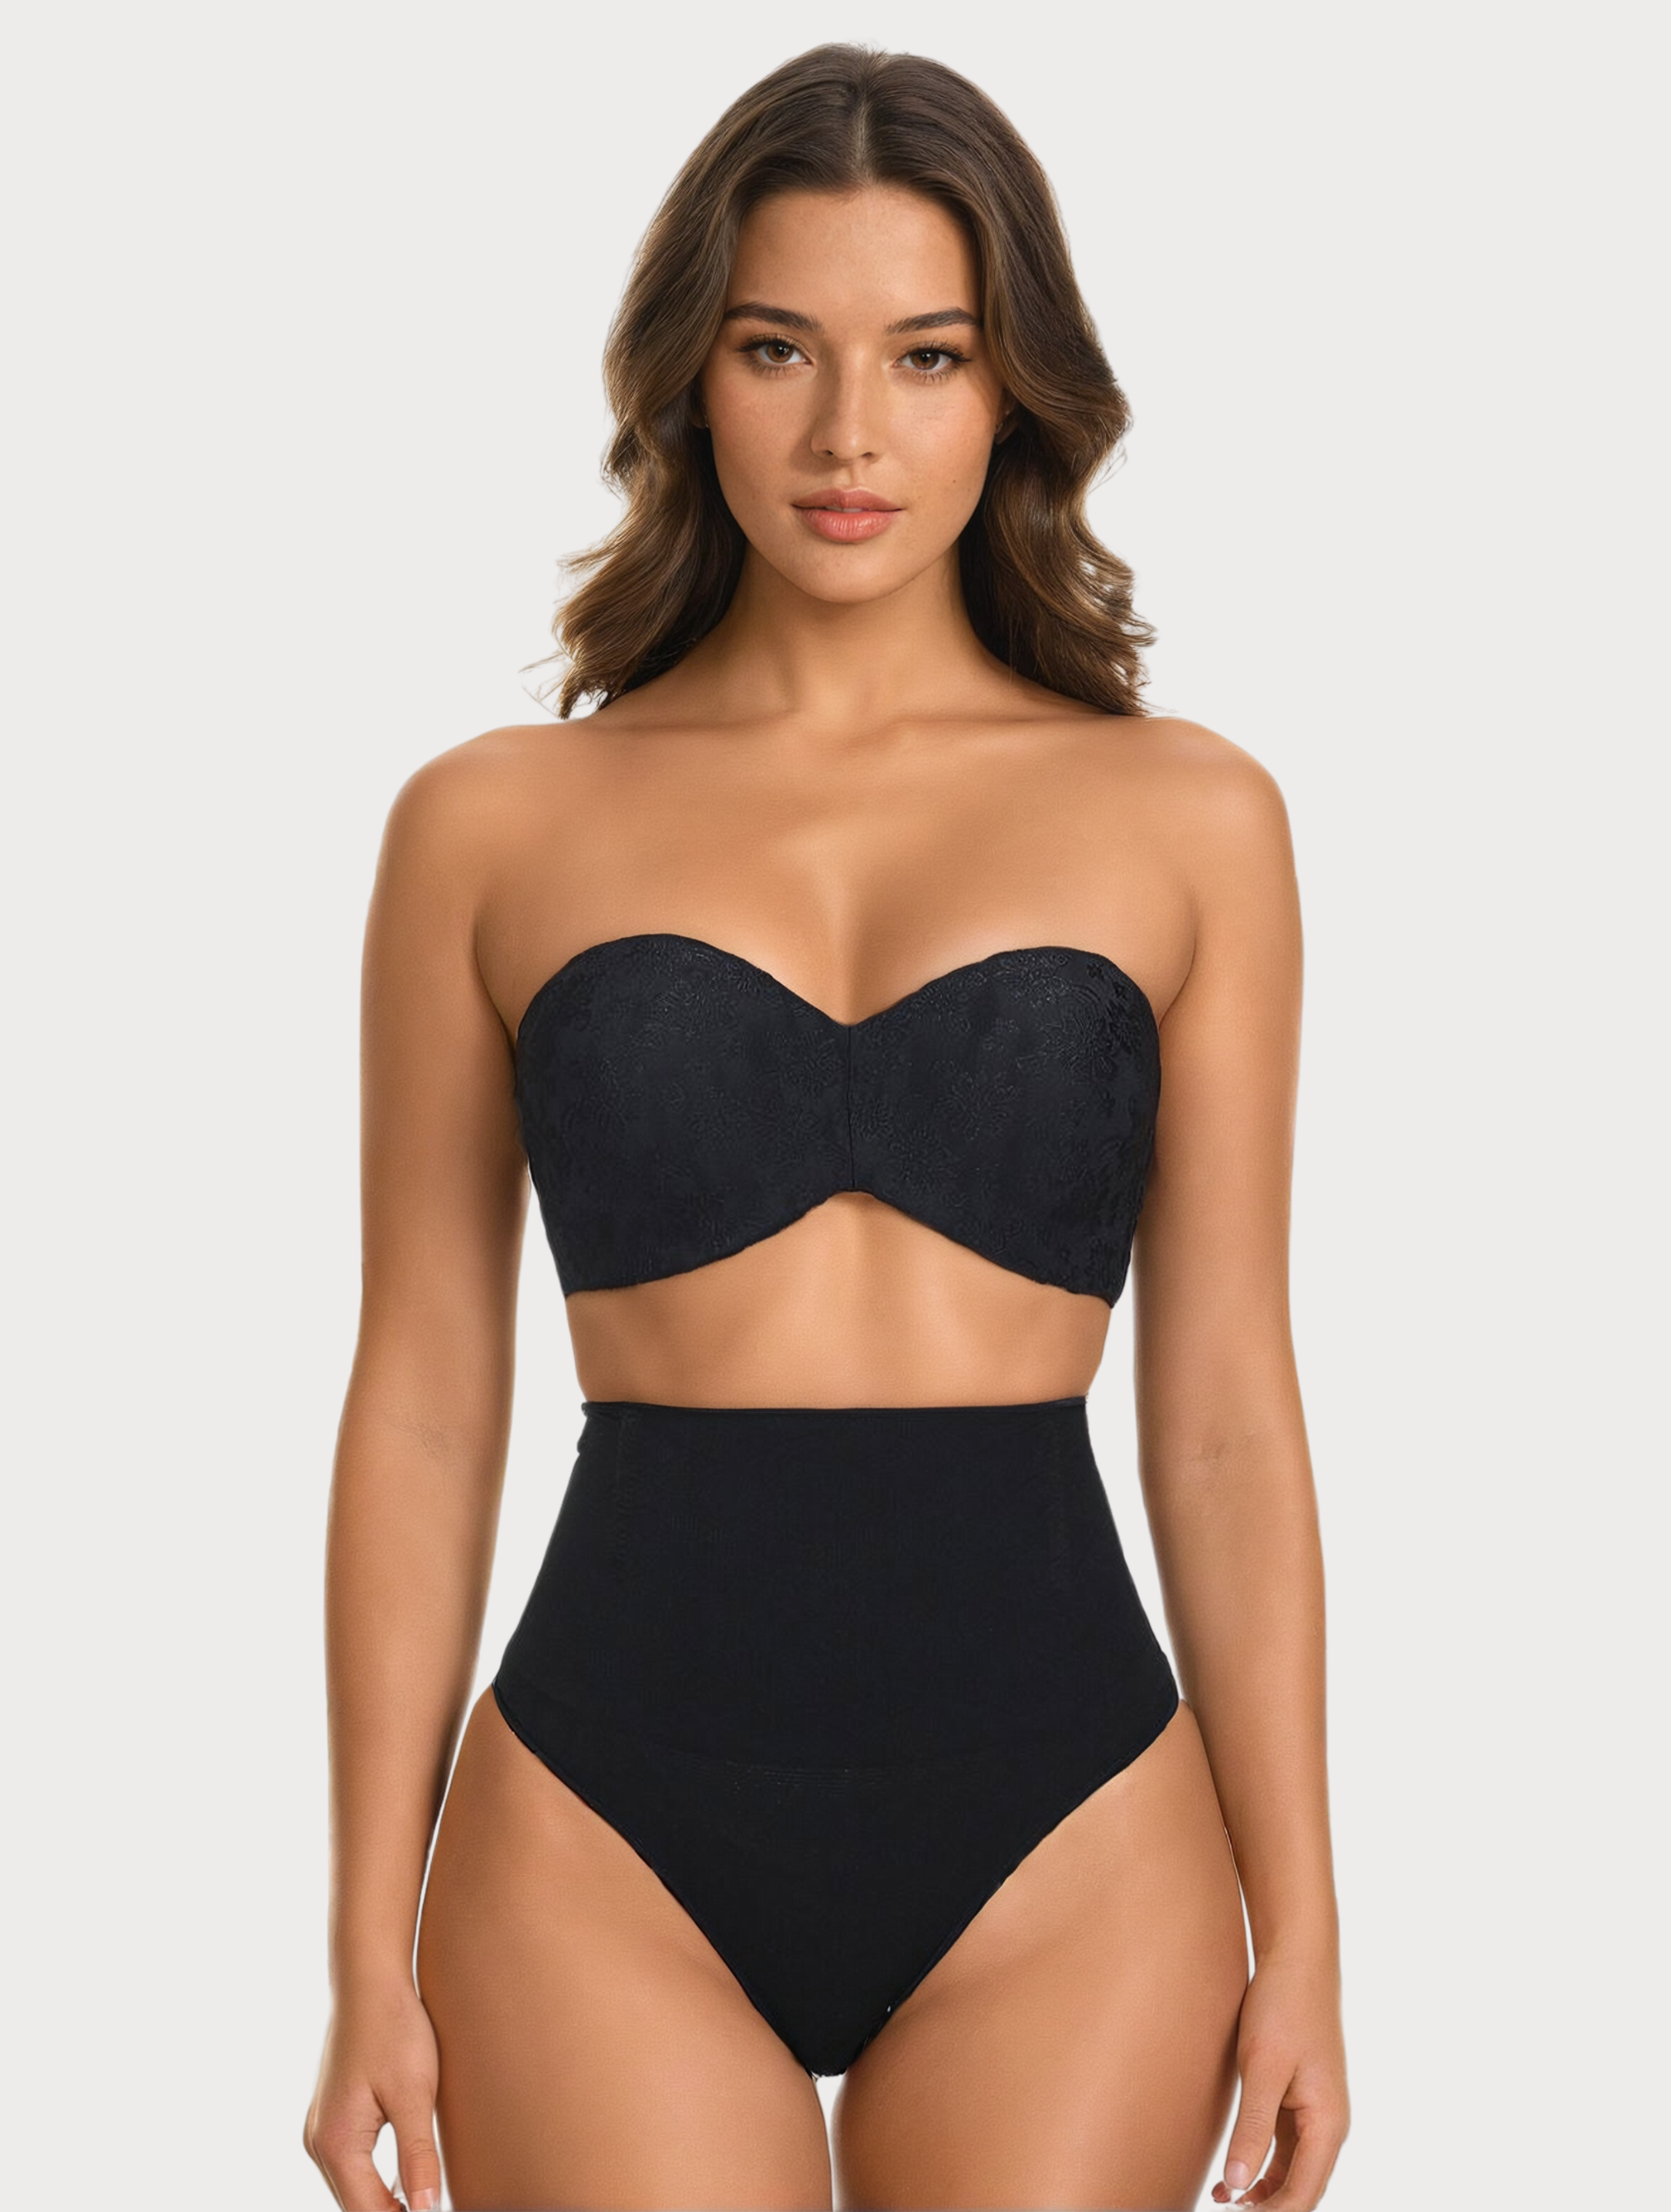 NWT! Pinsy Spaghetti Scoop Shapesuit Thong - Size XL - $40 New With Tags -  From Carrie